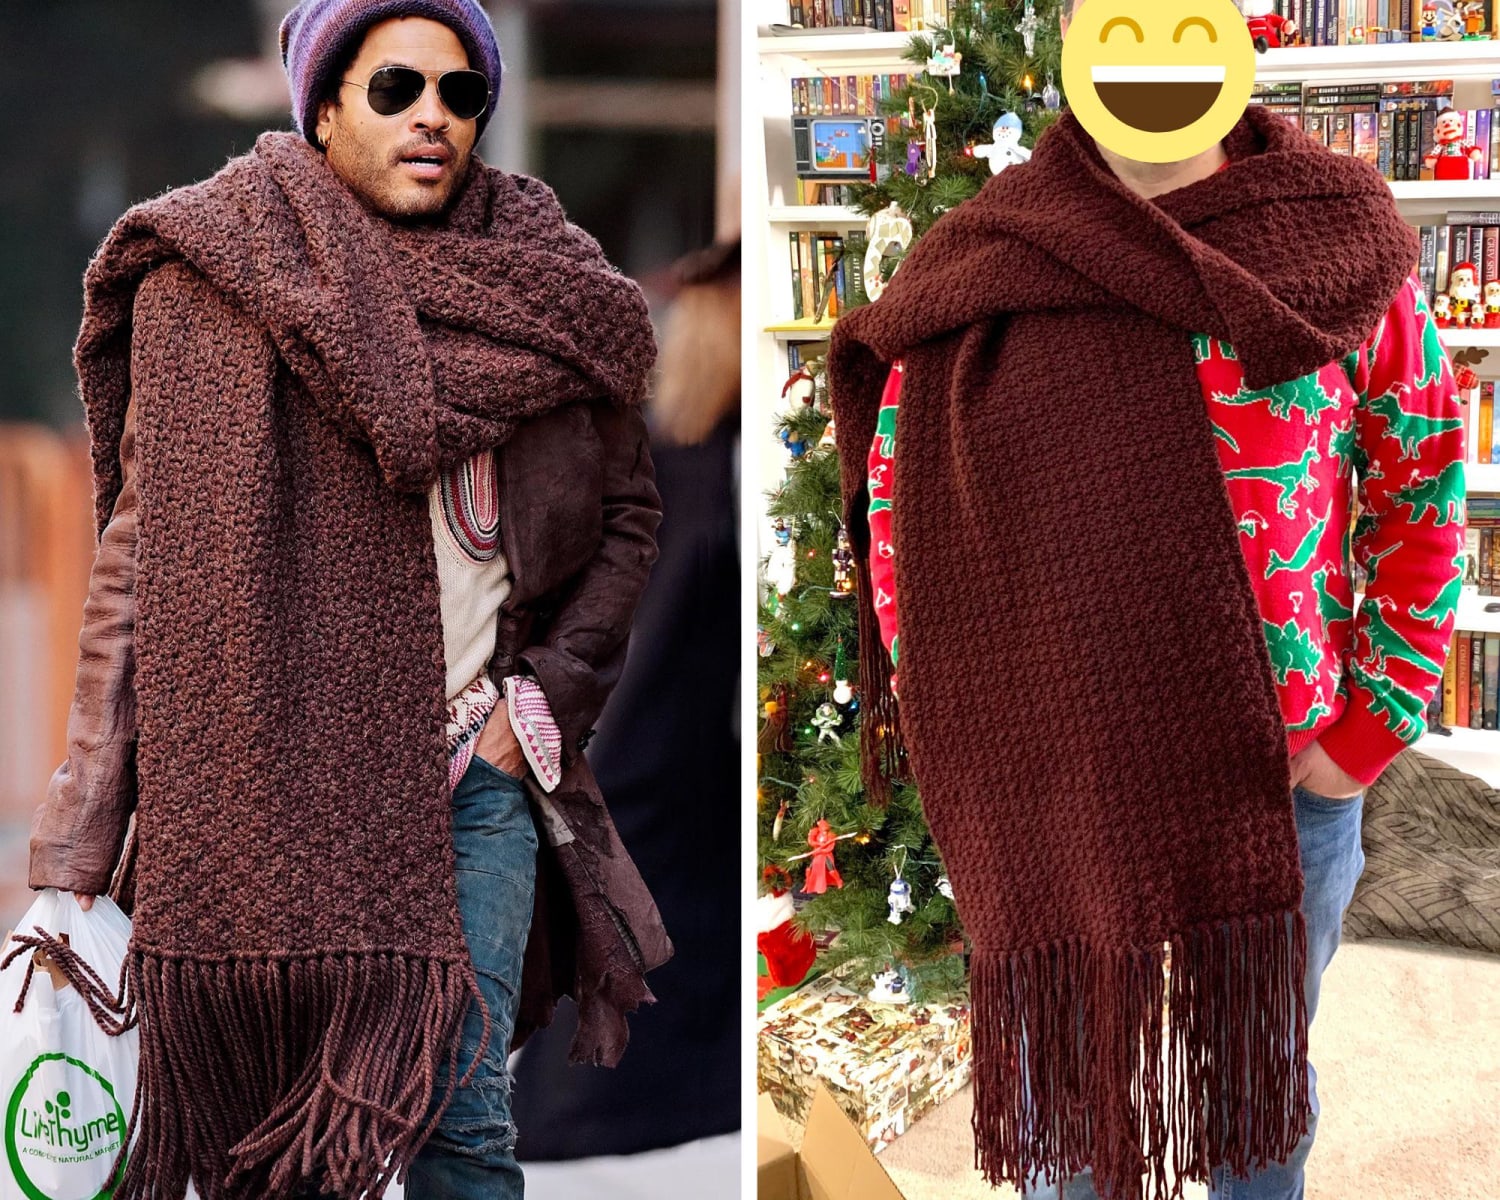 I made my dad a giant scarf for Christmas since he’s been asking for a ‘Lenny Kravitz’ scarf for years! How did I do?